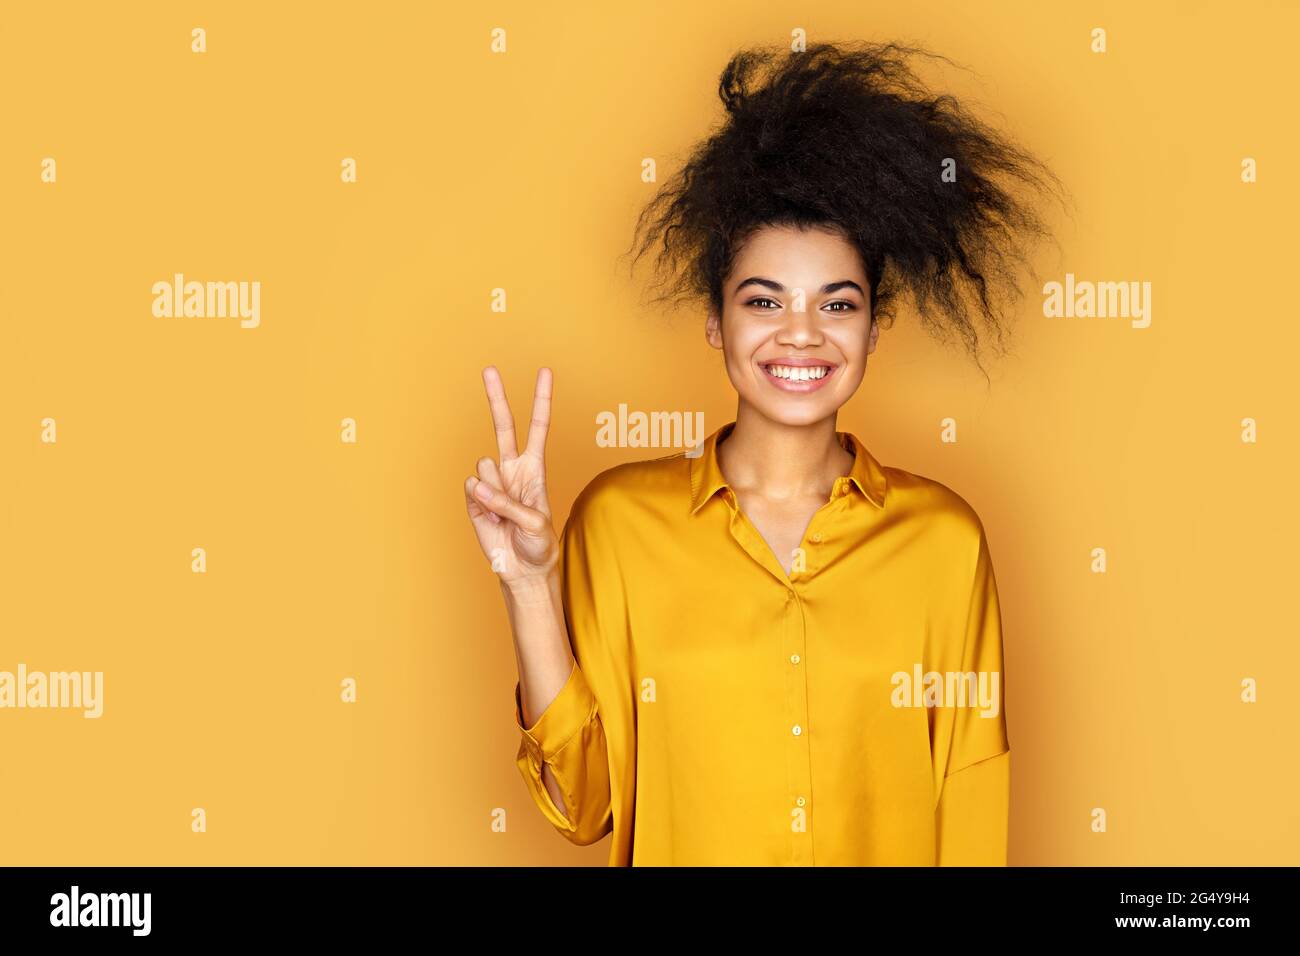 Smiling girl showing peace sign or V gesture with fingers. Photo of african american girl on yellow background Stock Photo